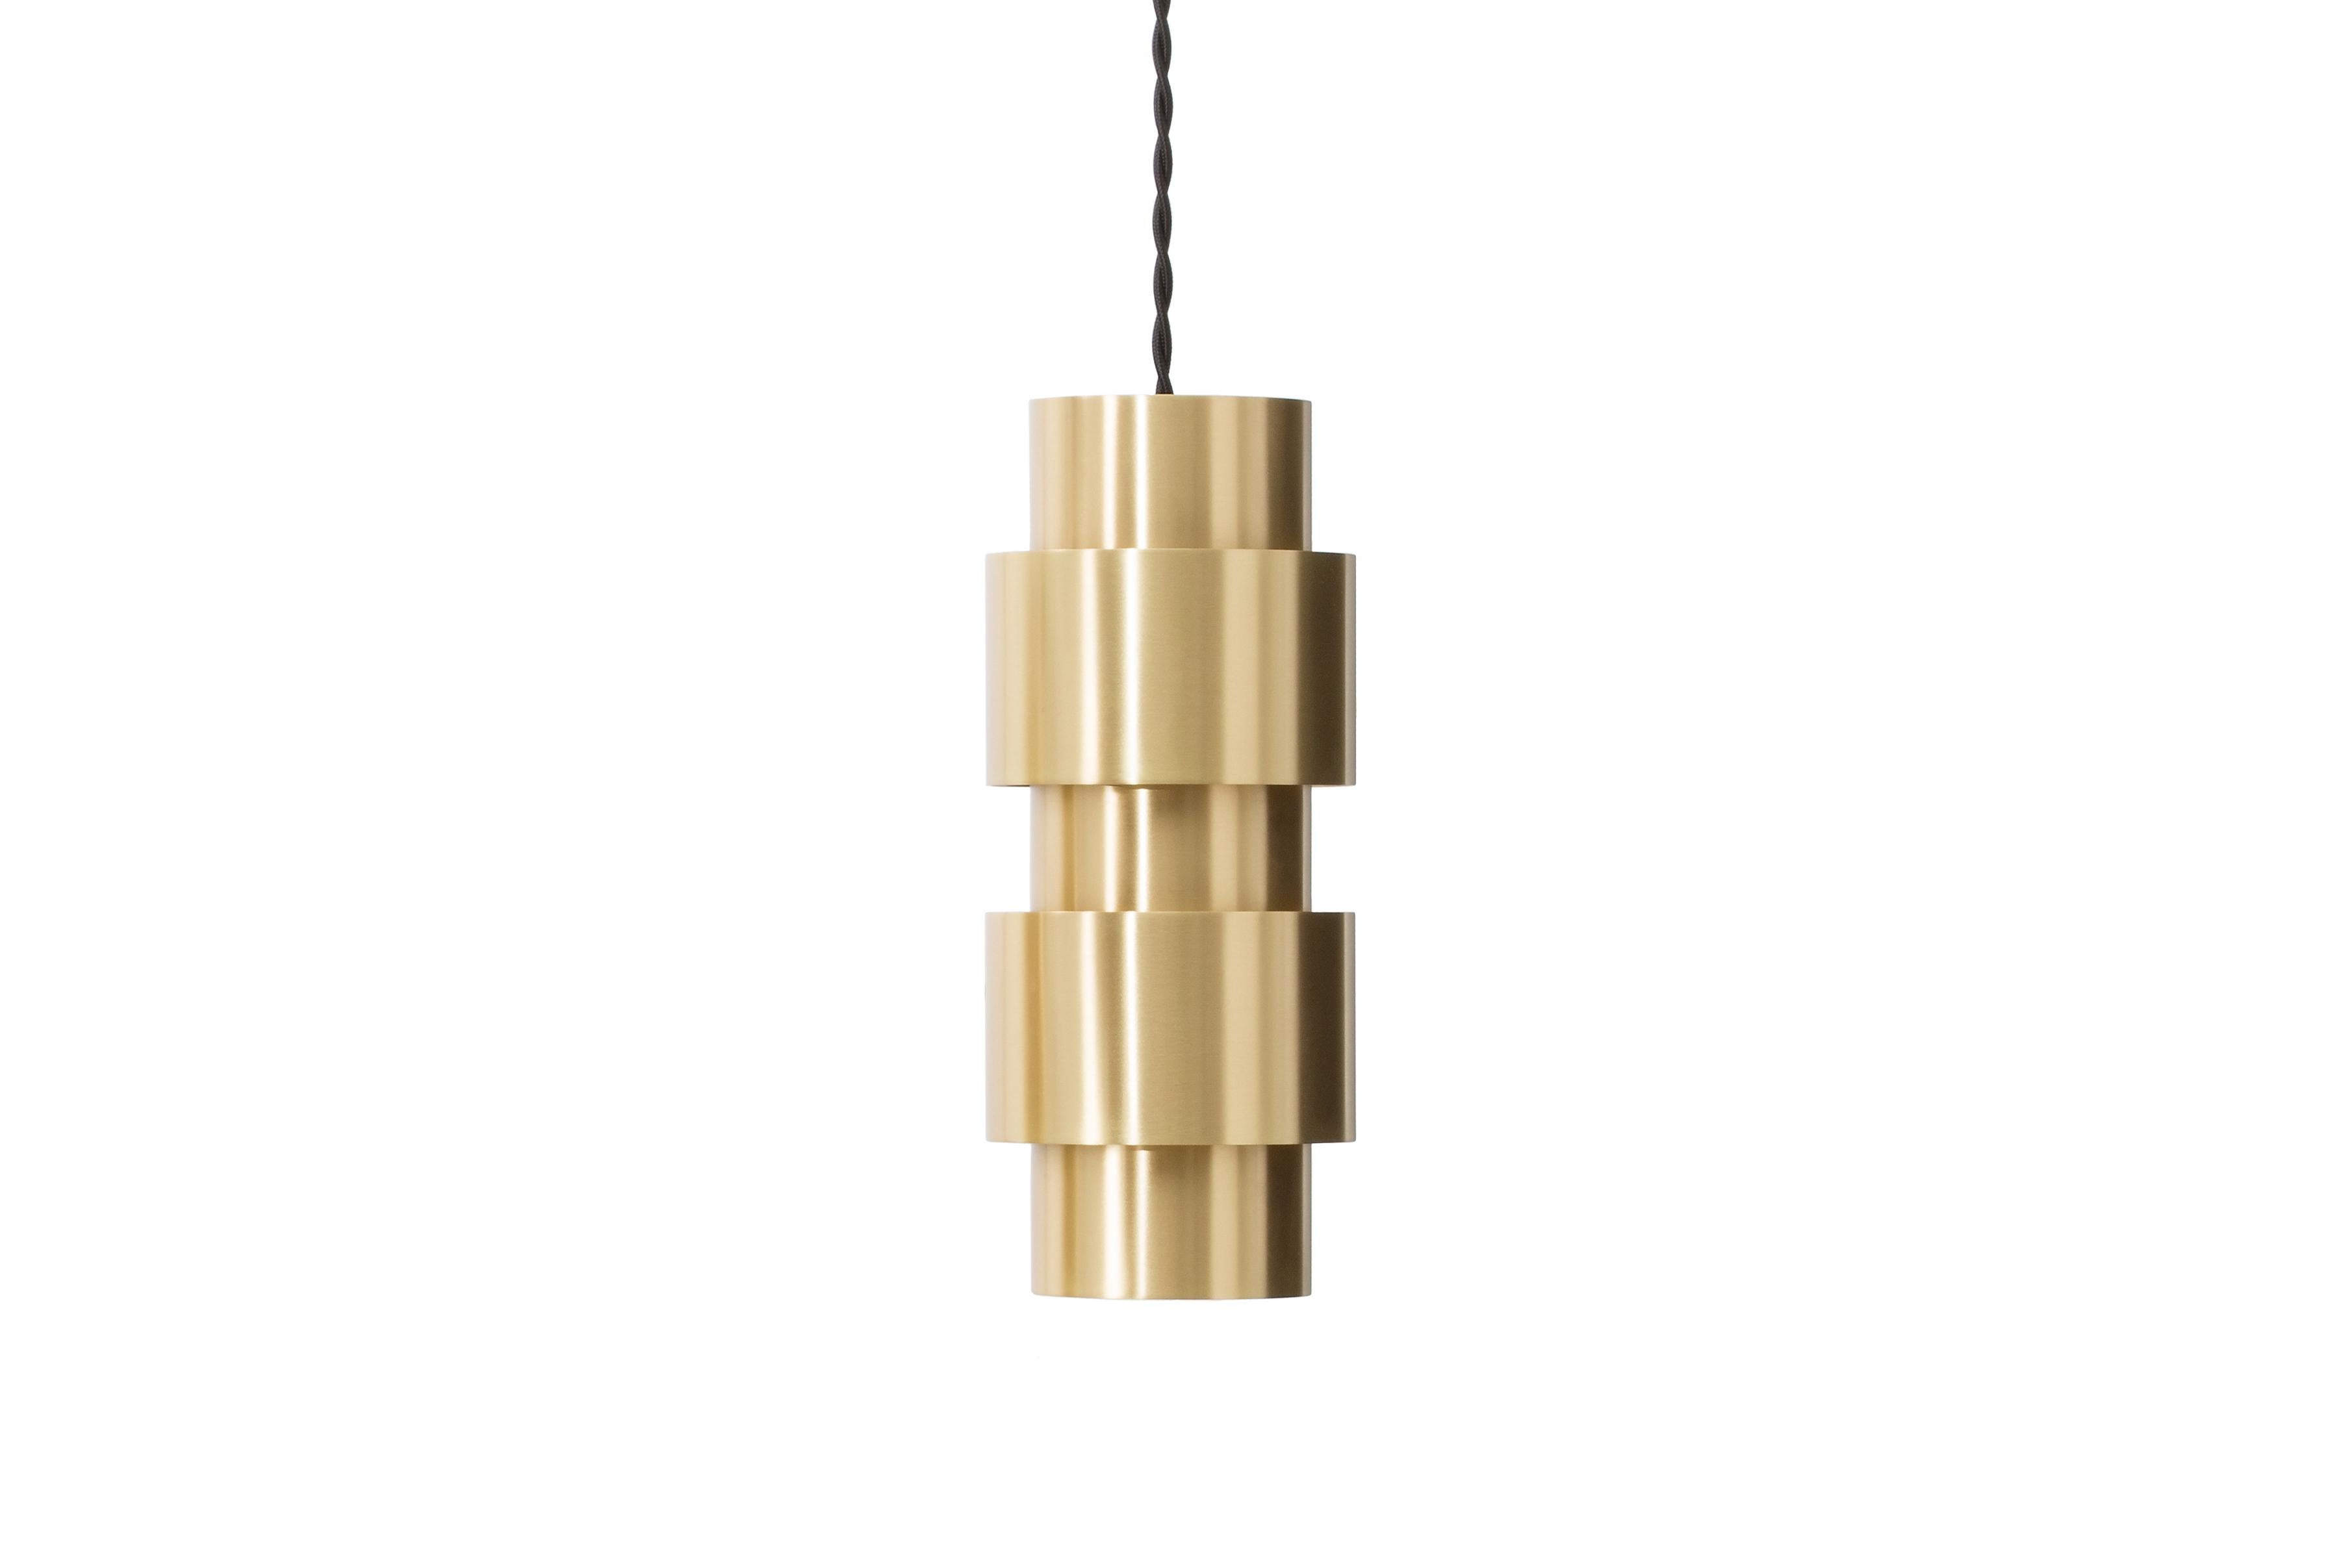 Ring pendant by CTO Lighting
Materials: satin brass with black silk braided flex
Also available in bronze and satin brass with black silk braided flex
Dimensions: H 24 x W 10 cm 

All our lamps can be wired according to each country. If sold to